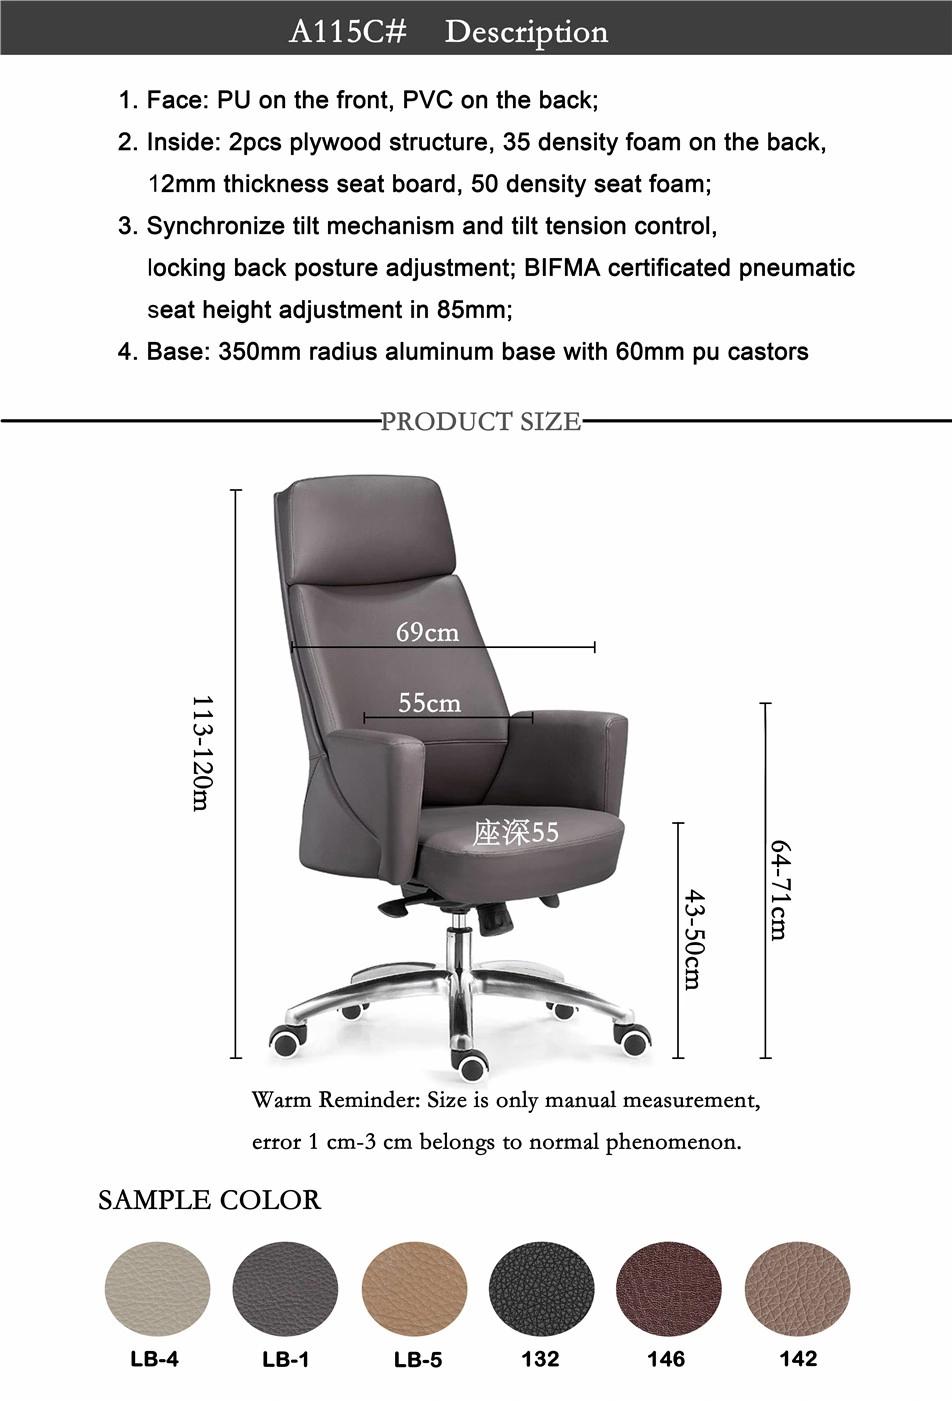 Modern Luxury High Back Leather Wheels Executive Office Computer Chair